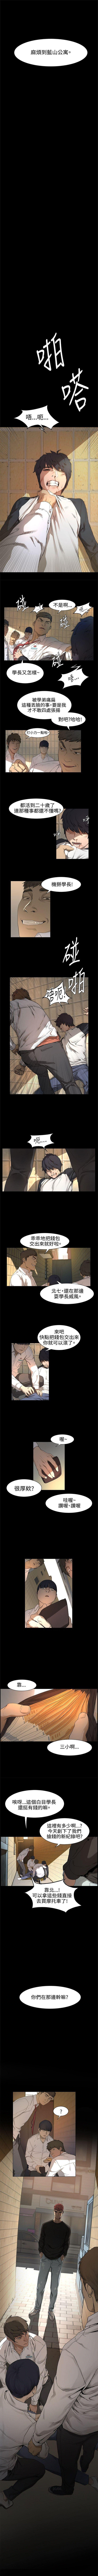 Time 衝突 1-106 官方中文（連載中） Freeteenporn - Page 5